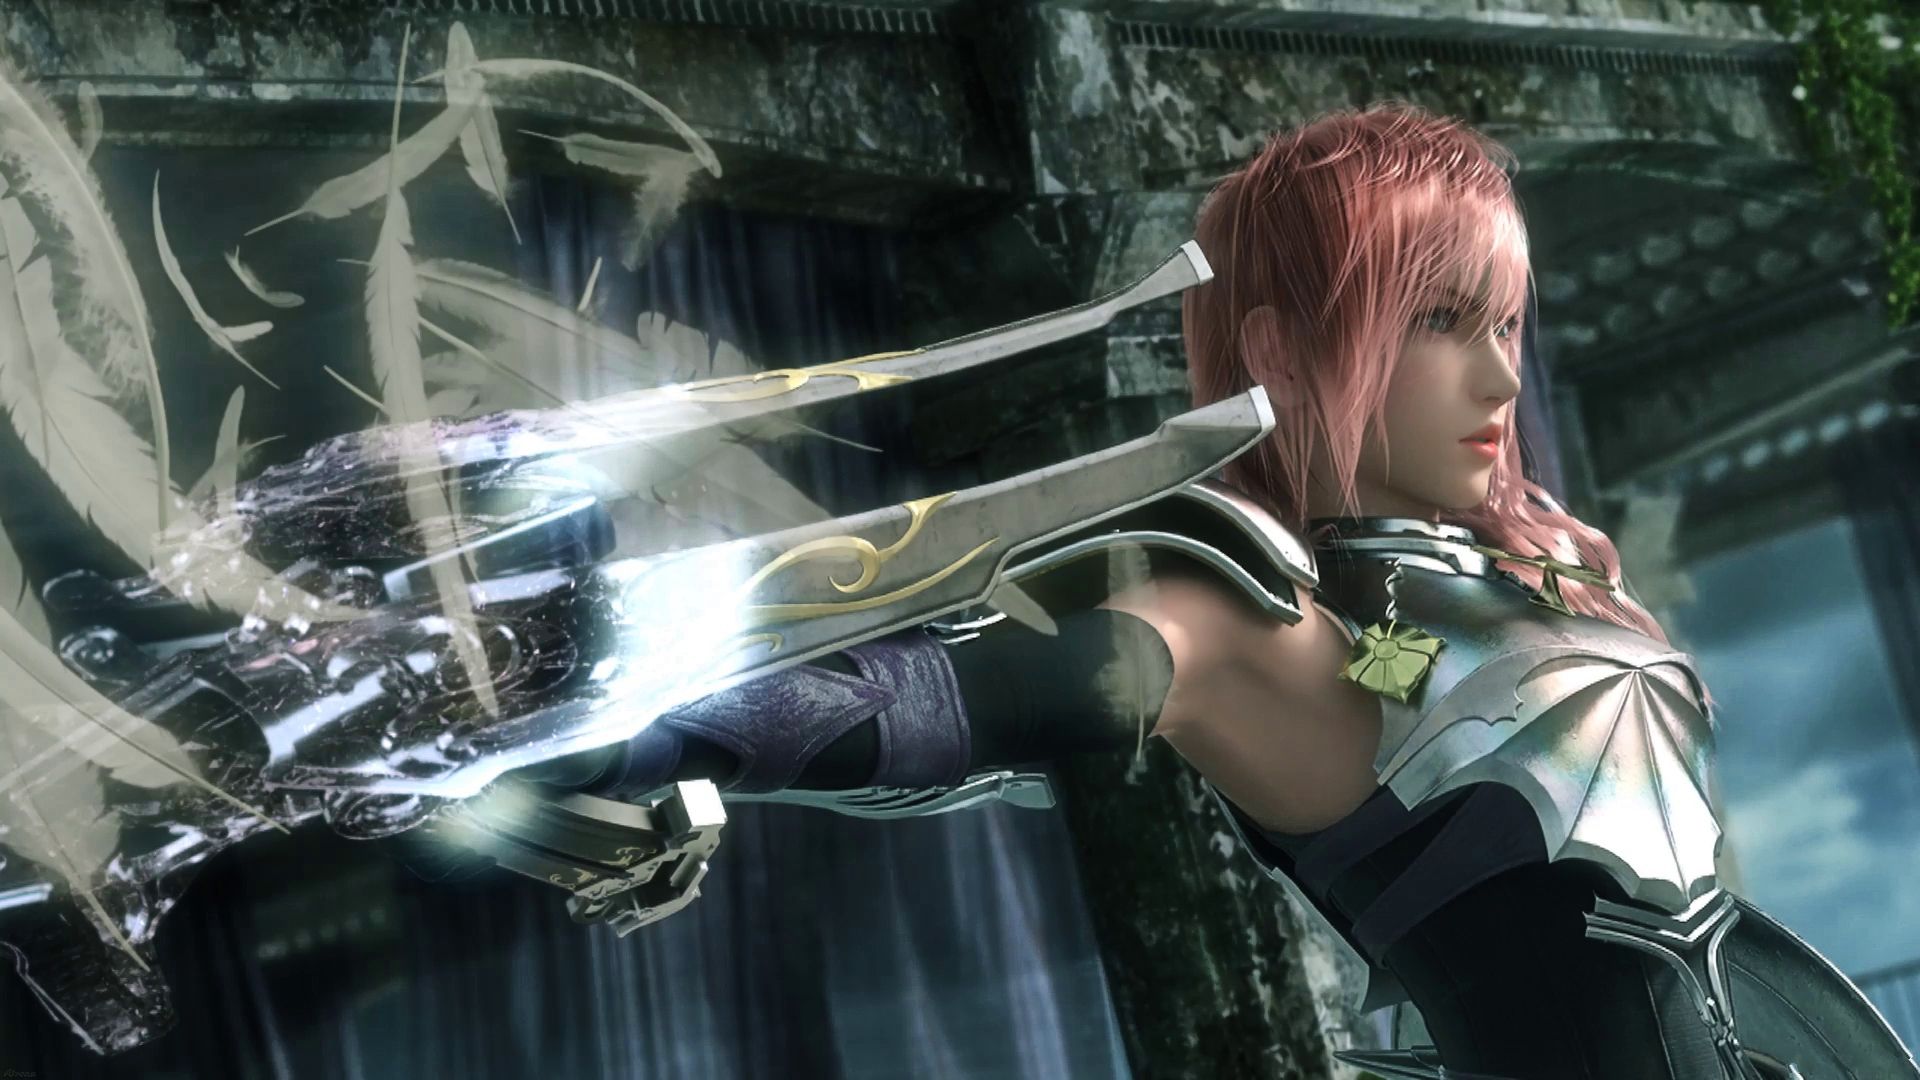 Final Fantasy XIII-2 Wallpapers | Free Downloads | inMotion Gaming